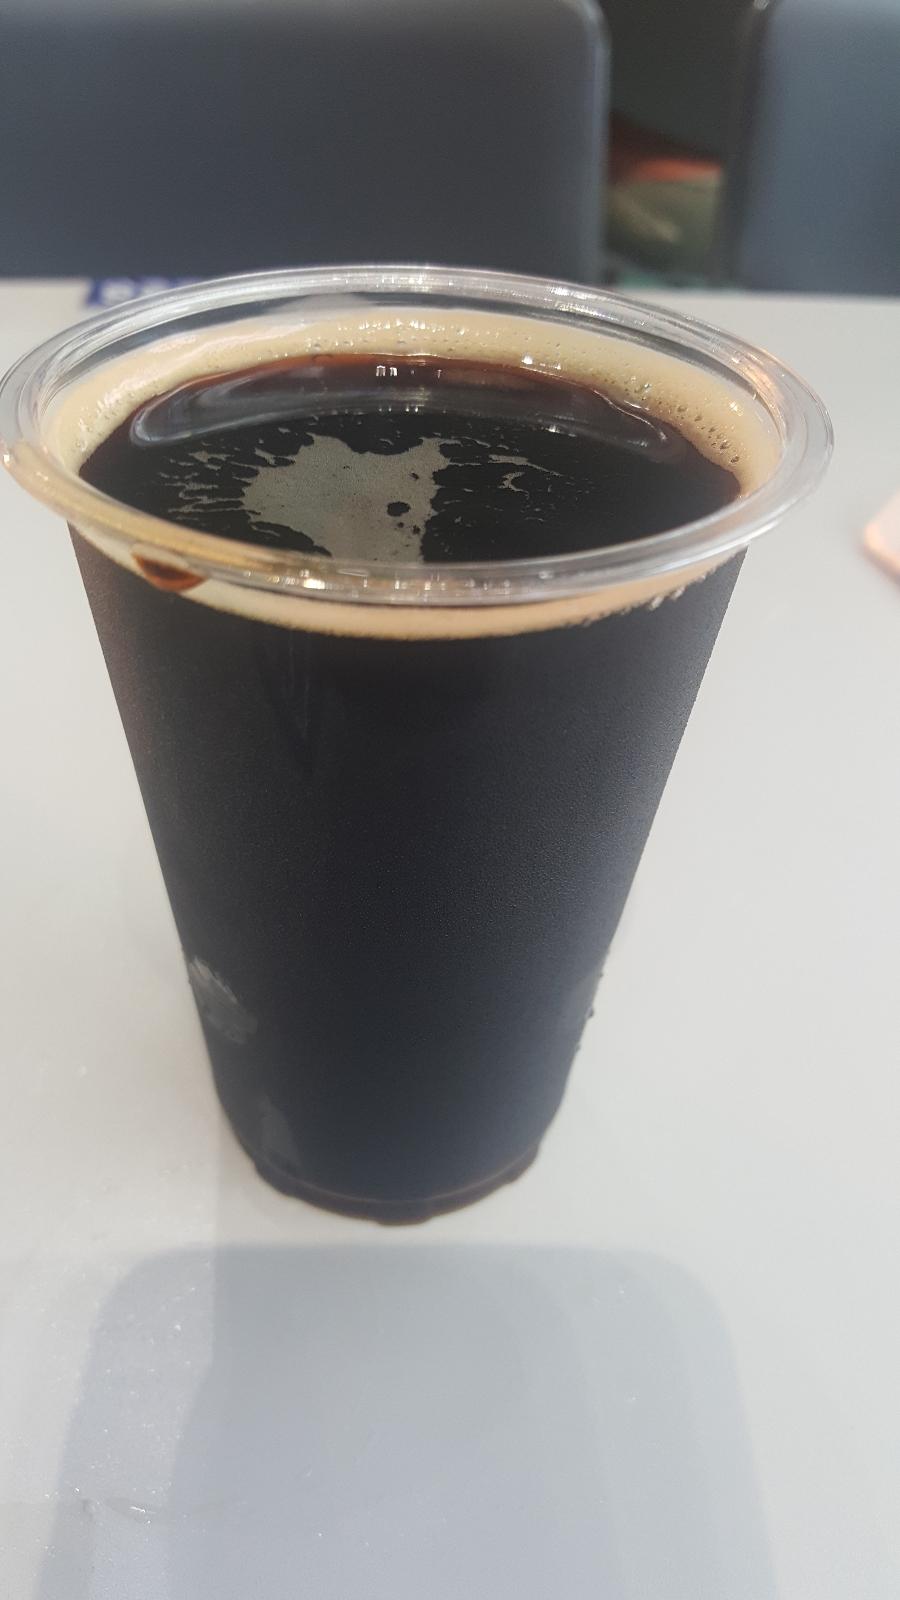 The Dark Side Imperial Stout